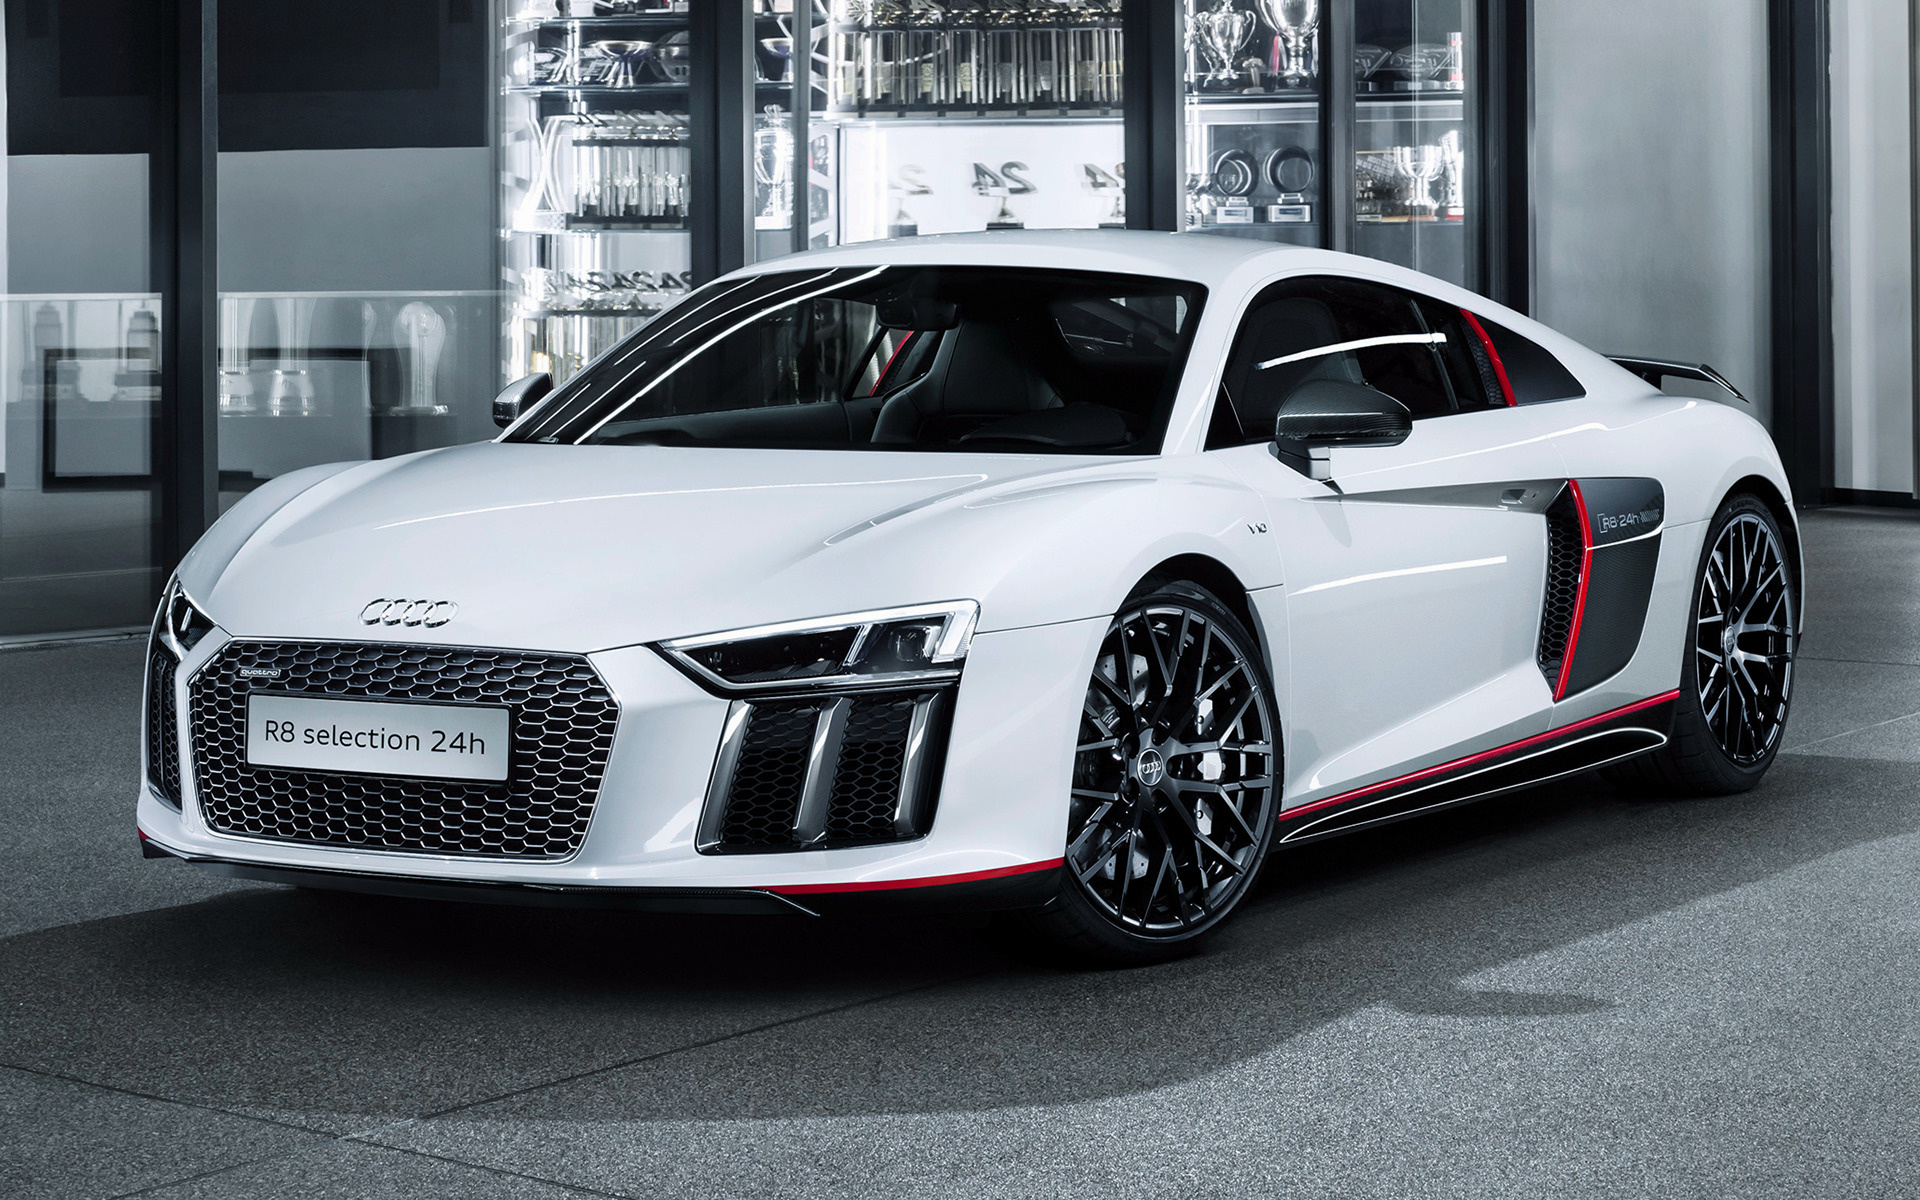 Audi R8 V10 Plus Selection 24h Wallpapers And Hd Images - 2018 Audi R8 White - HD Wallpaper 